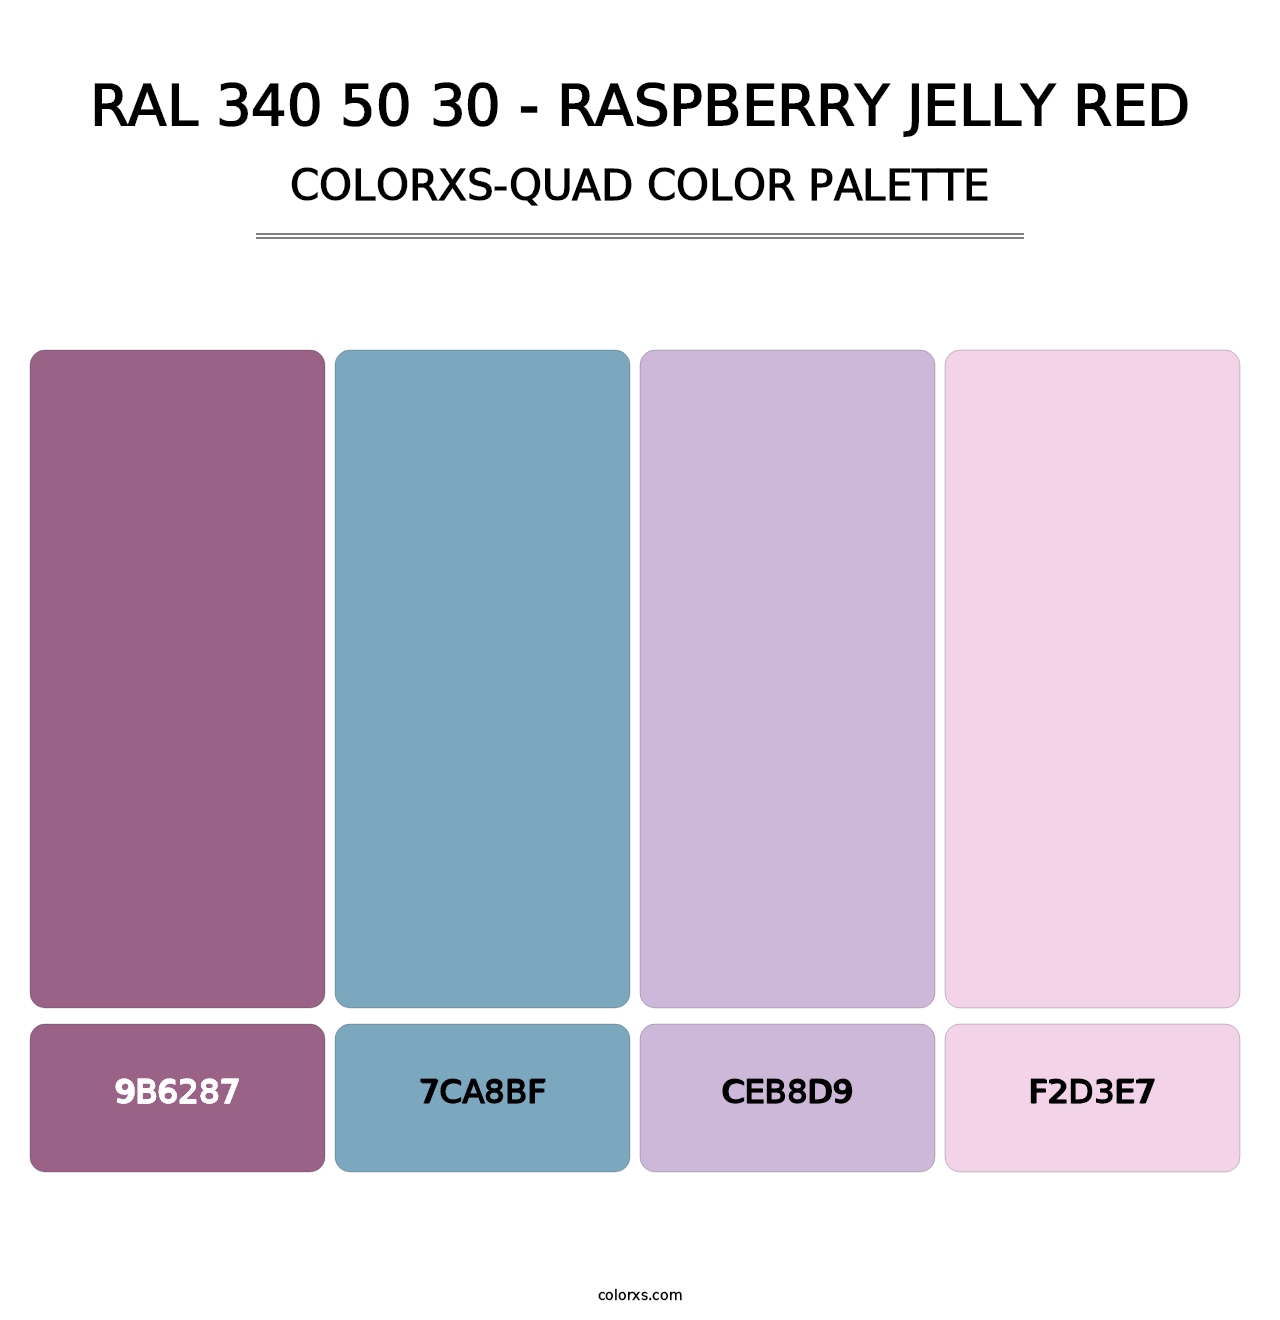 RAL 340 50 30 - Raspberry Jelly Red - Colorxs Quad Palette